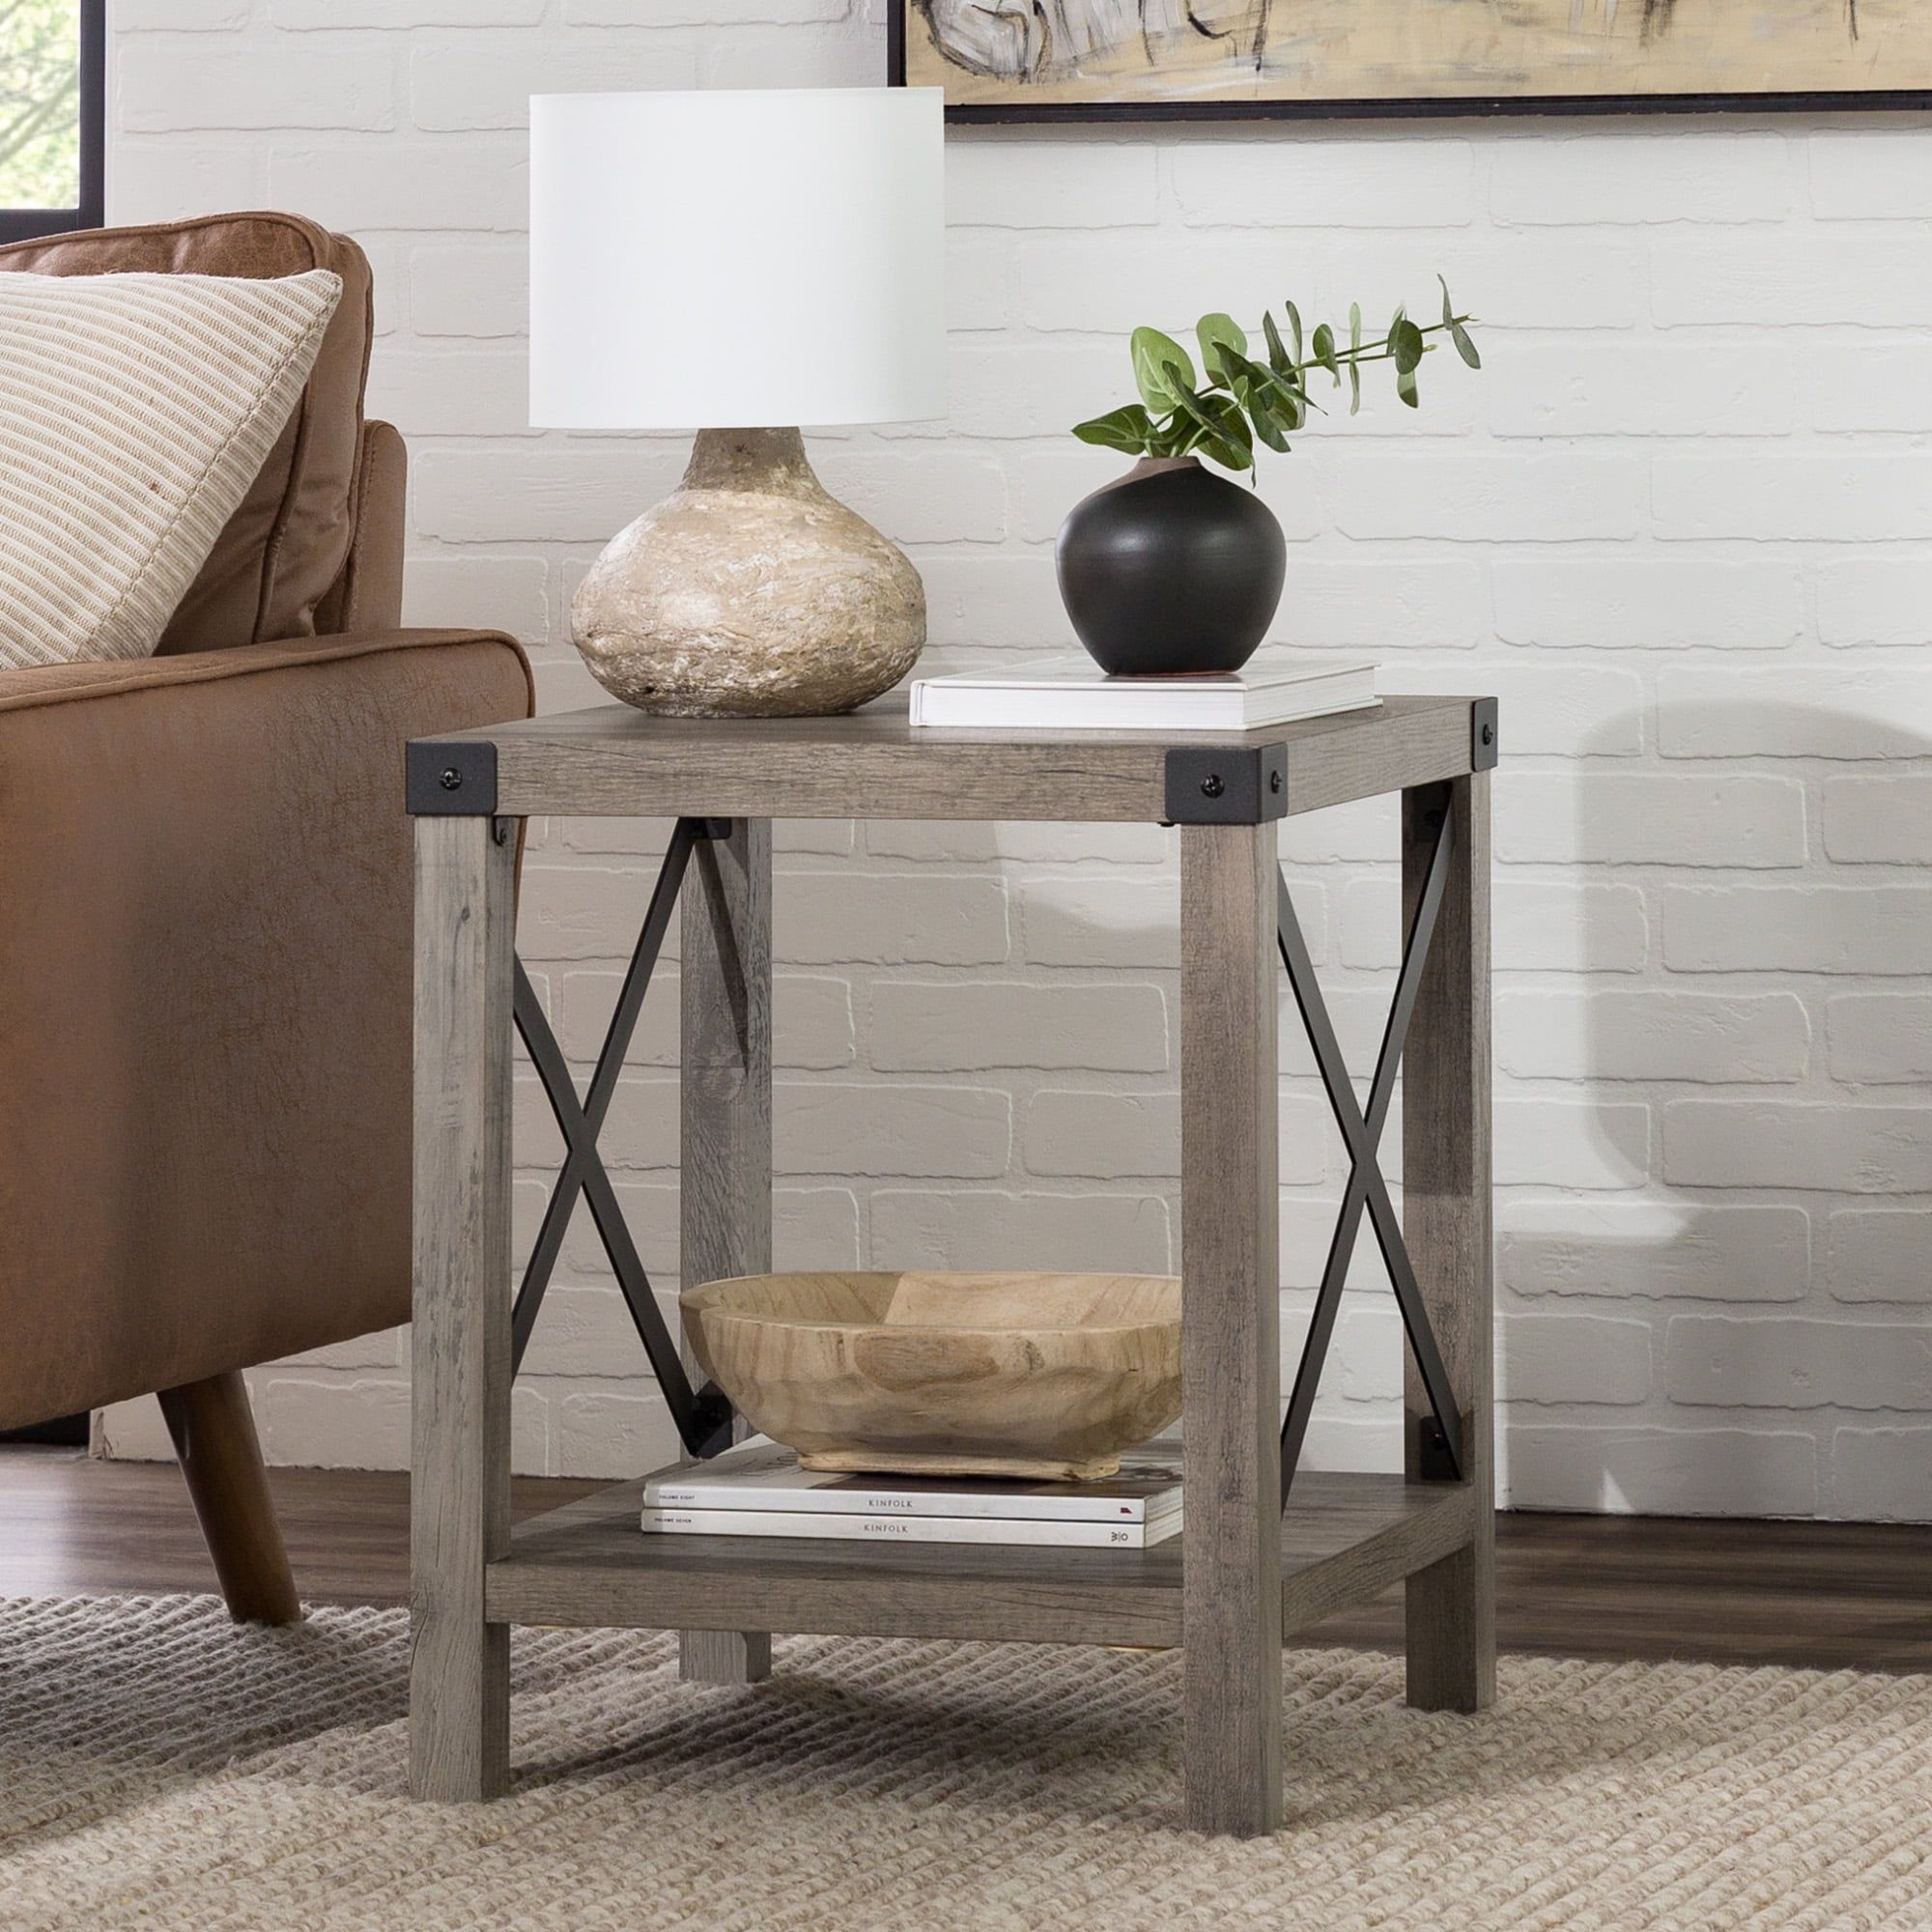 Woven Paths Magnolia Metal X End Table, Grey Wash – Walmart With Regard To Rustic Gray End Tables (Photo 4 of 15)